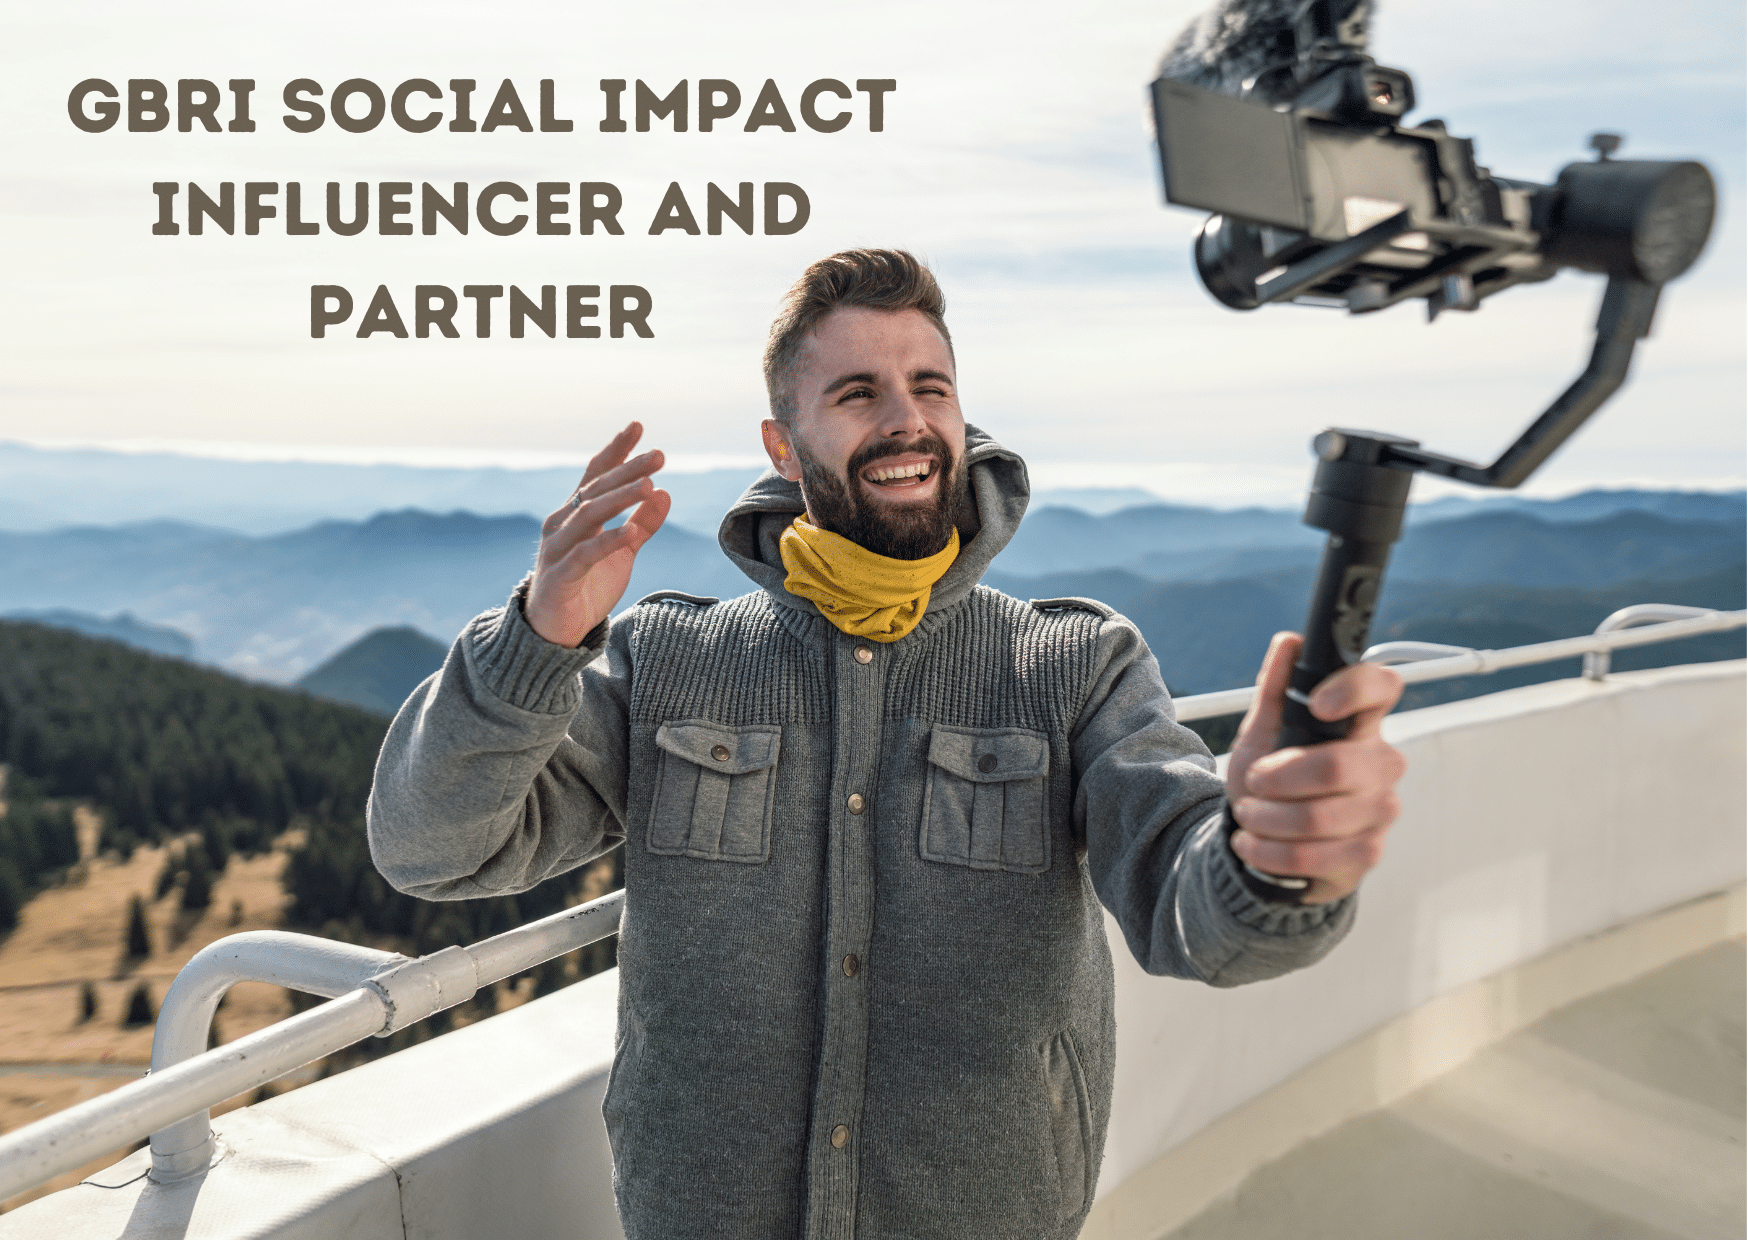 GBRI Social Impact Influencer and Partner